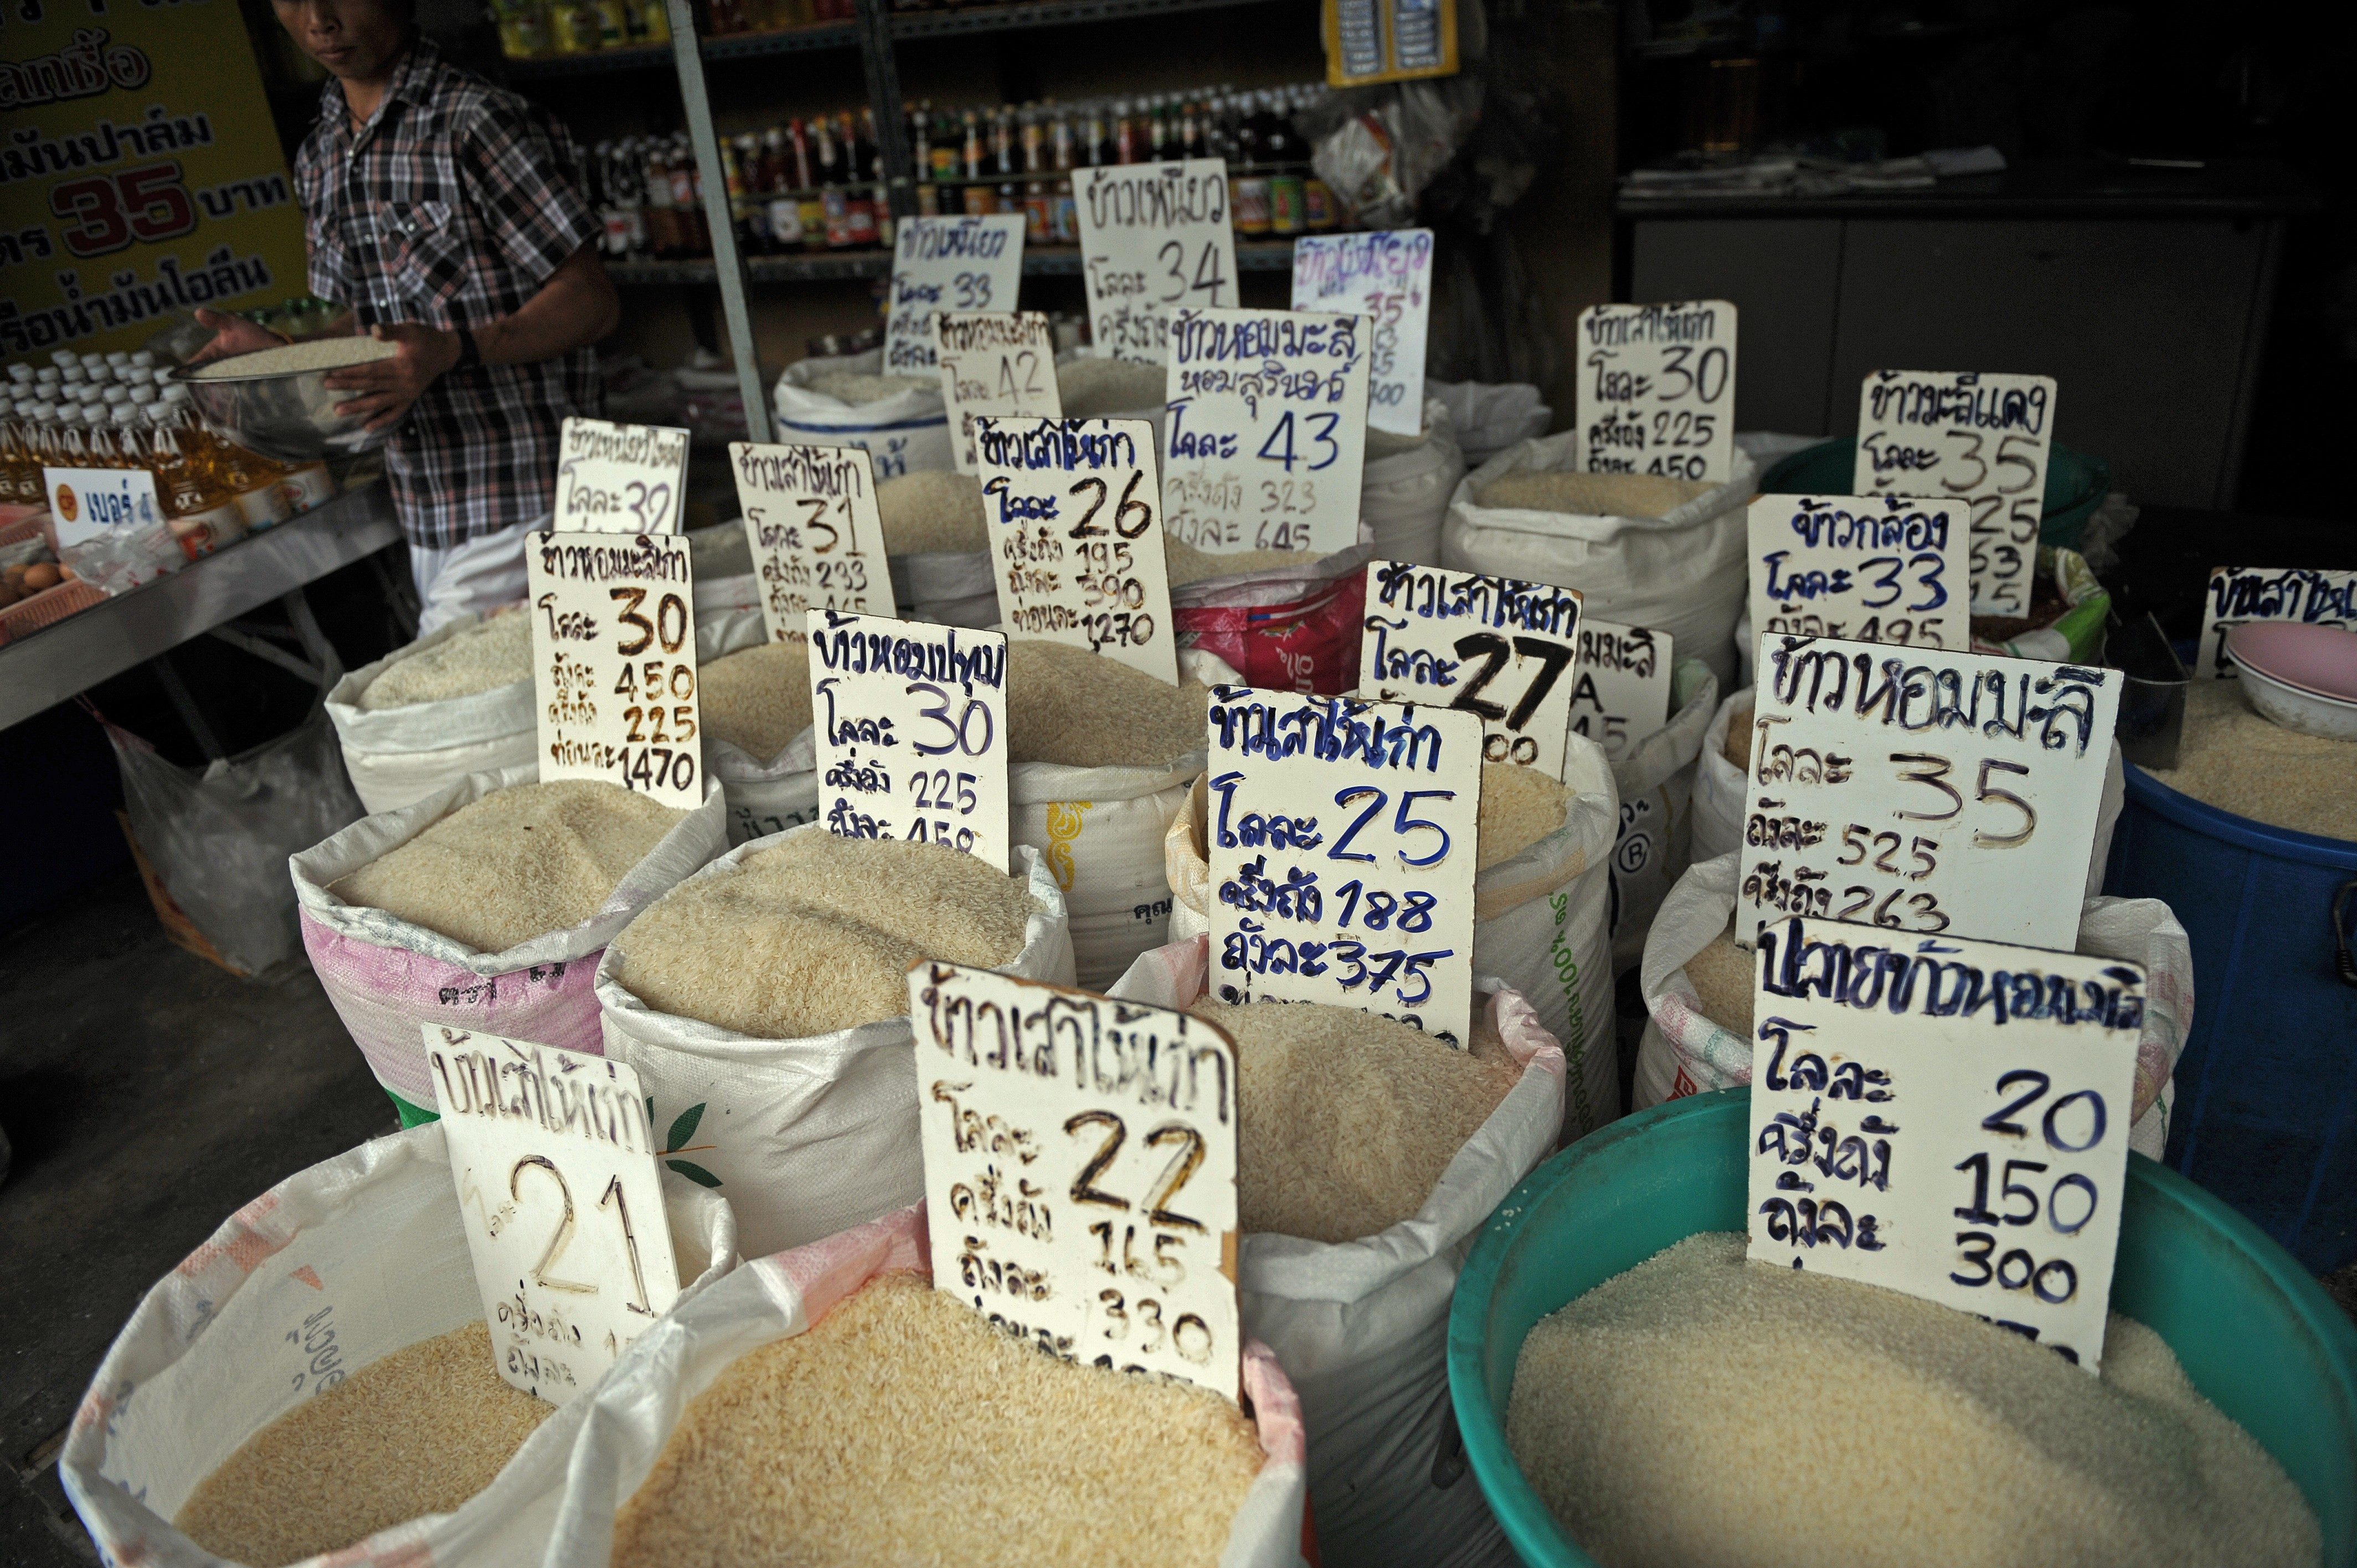 A Thai vendor carries a variety of rice to refill a bag at his shop at a market in Bangkok on September 25, 2011.  A populist policy aimed at boosting the incomes of Thai farmers has raised fears of global rice price turbulence, but experts say the kingdom could just be hurting itself.   AFP PHOTO/Christophe ARCHAMBAULT / AFP PHOTO / CHRISTOPHE ARCHAMBAULT